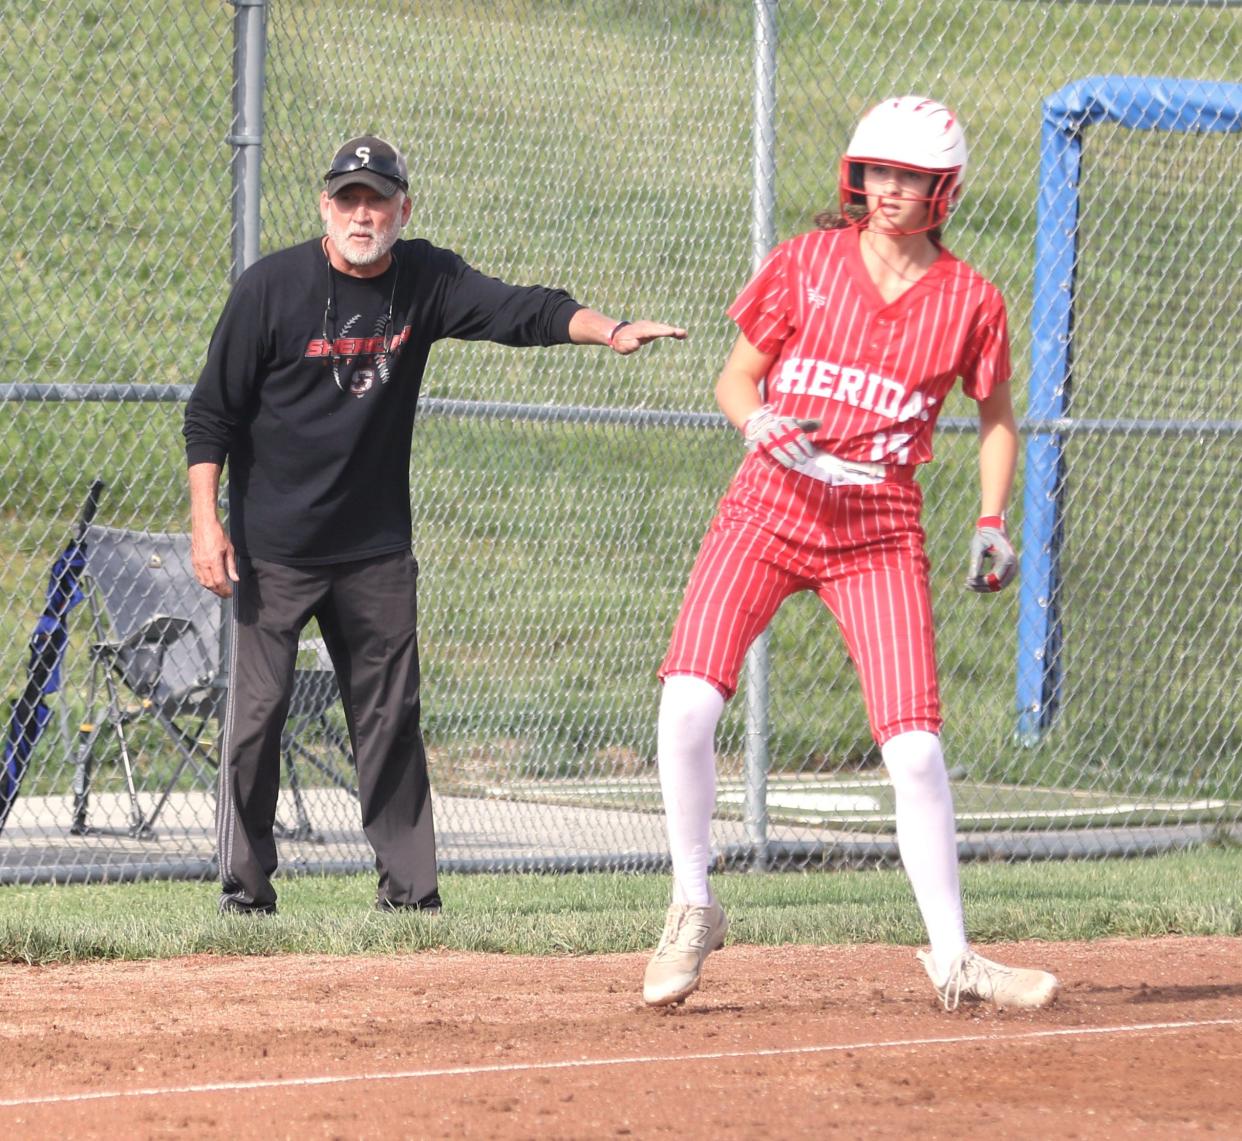 Sheridan's Hayley Clifton is held at third base by coach Mark Paxton after Avery Davis’ sacrifice bunt in the sixth inning of a 6-1 win over West Muskingum to complete a suspended game on Tuesday. The victory gave Paxton 400 for his career.